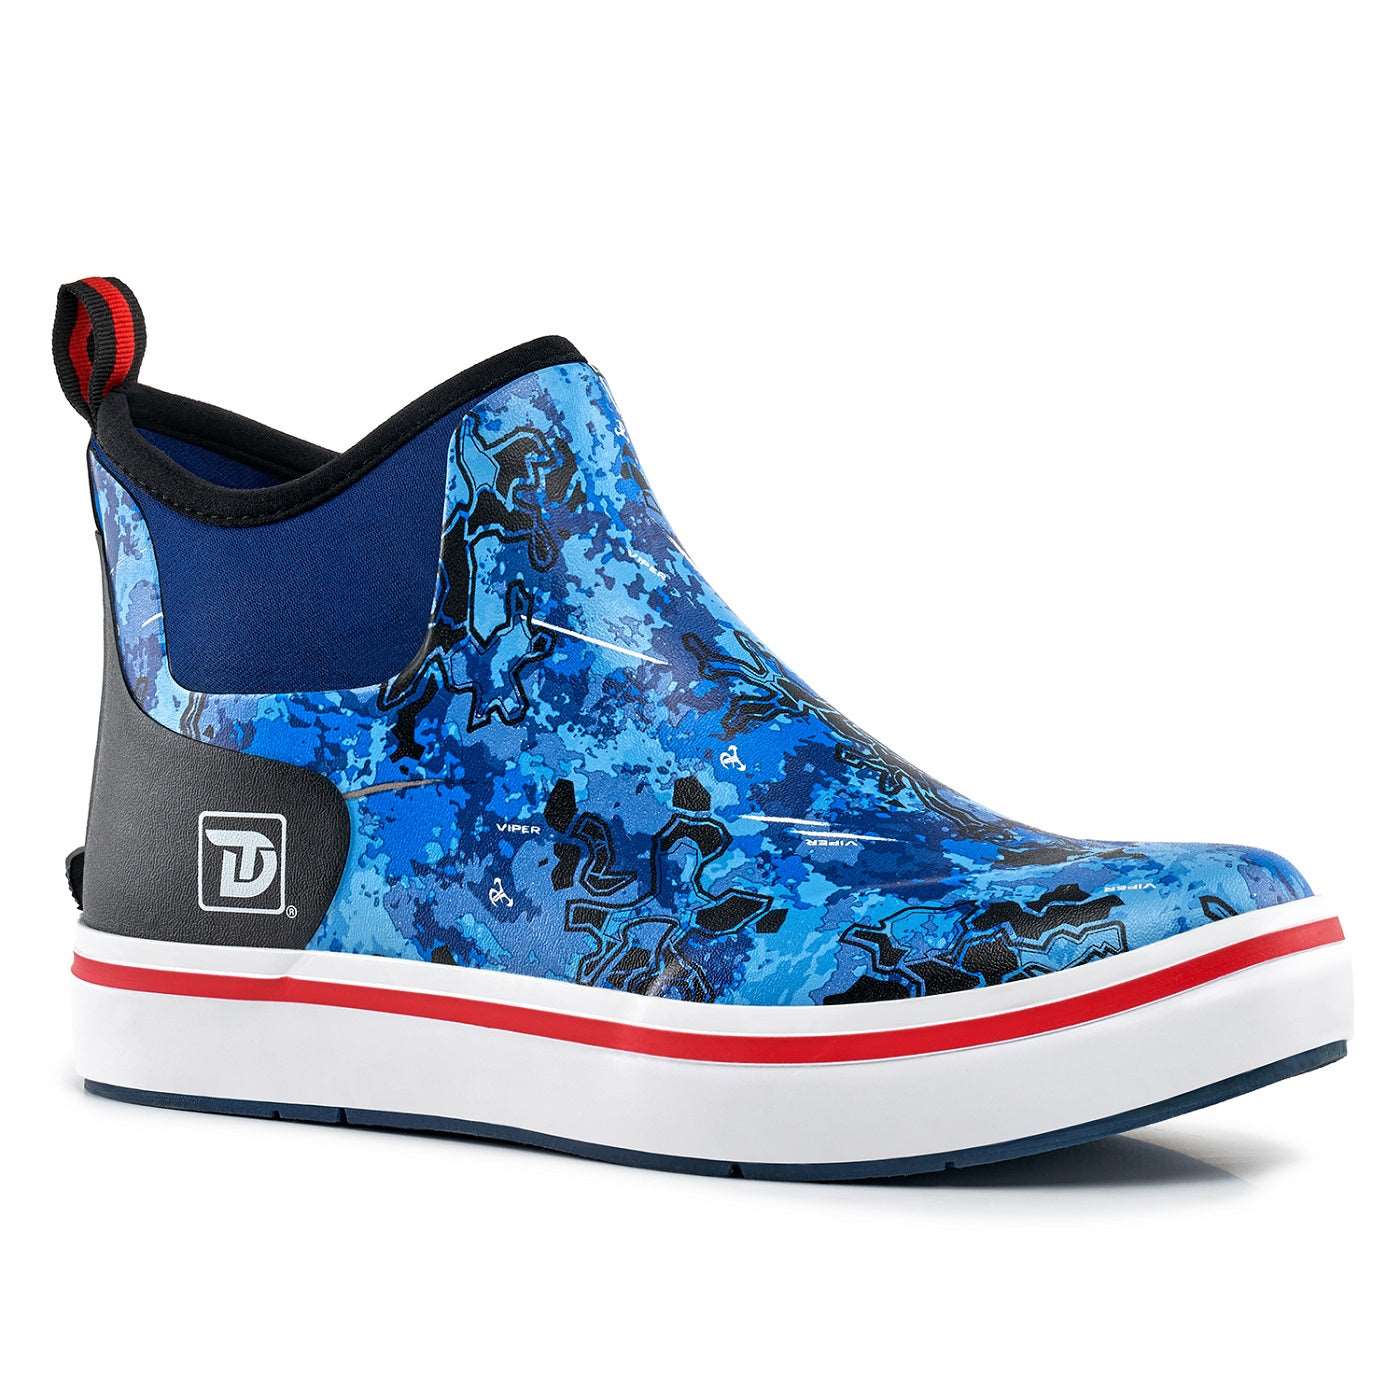 Trudave Blue Camo 5.7 IN Men's Ankle Deck Boots